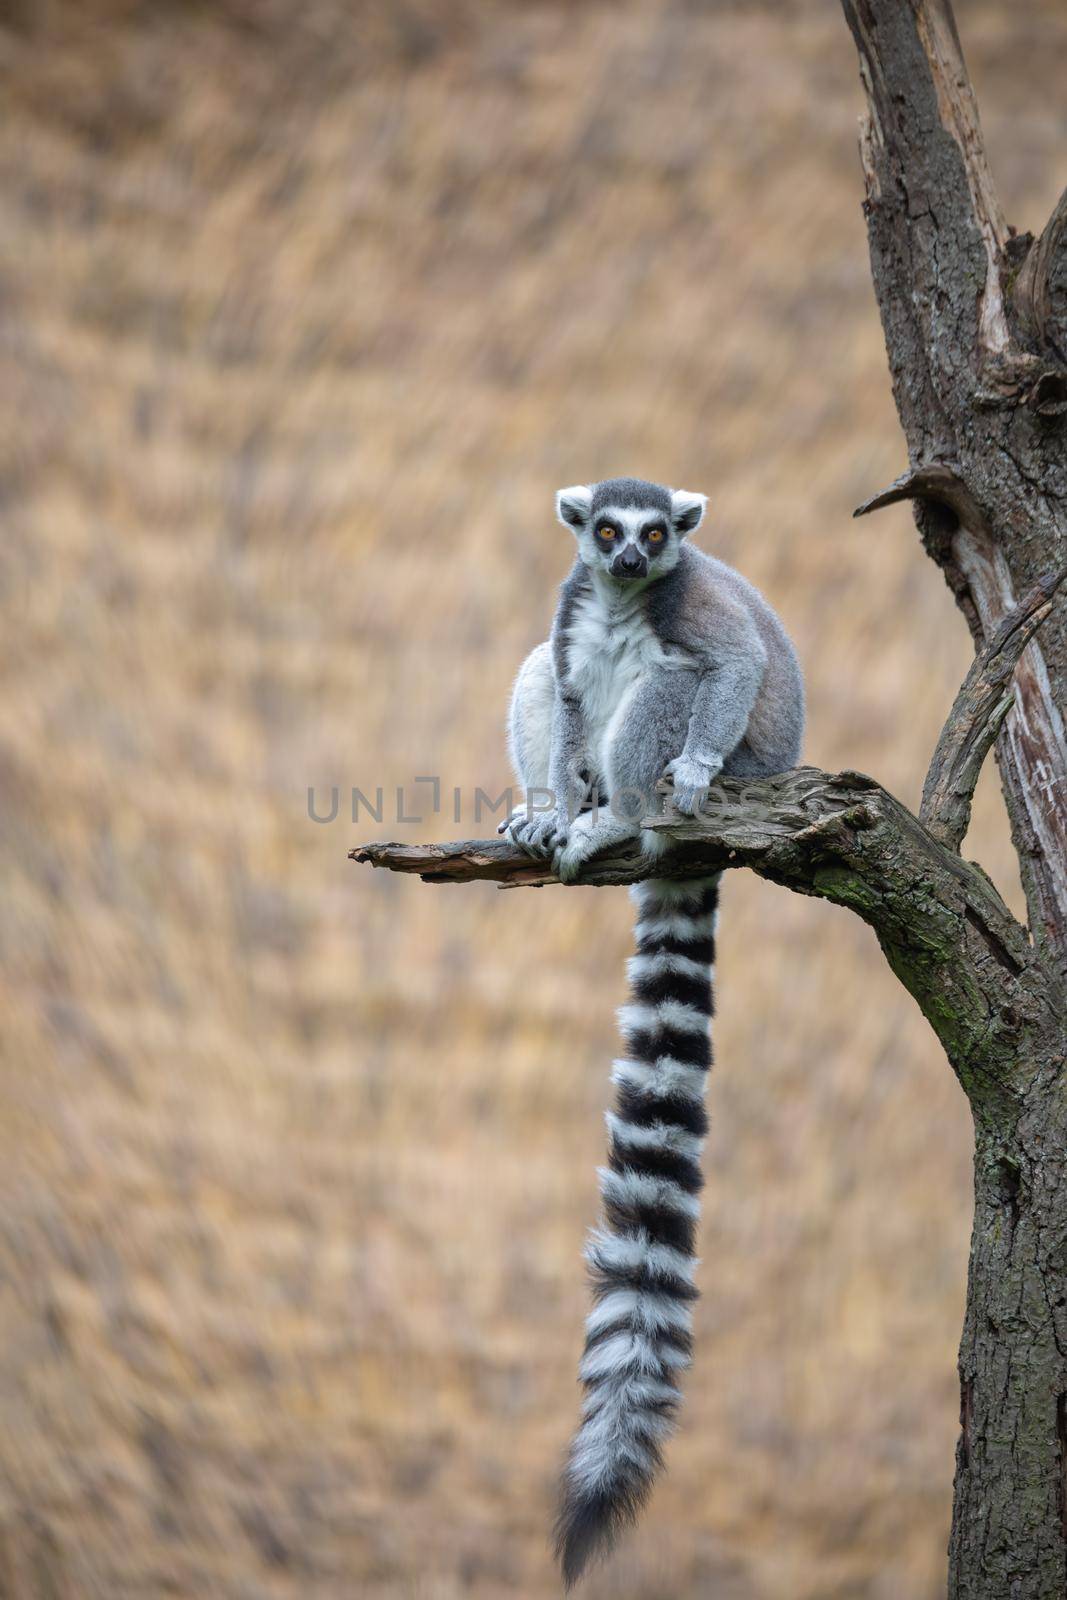 cute and playful Ring-tailed lemur by artush